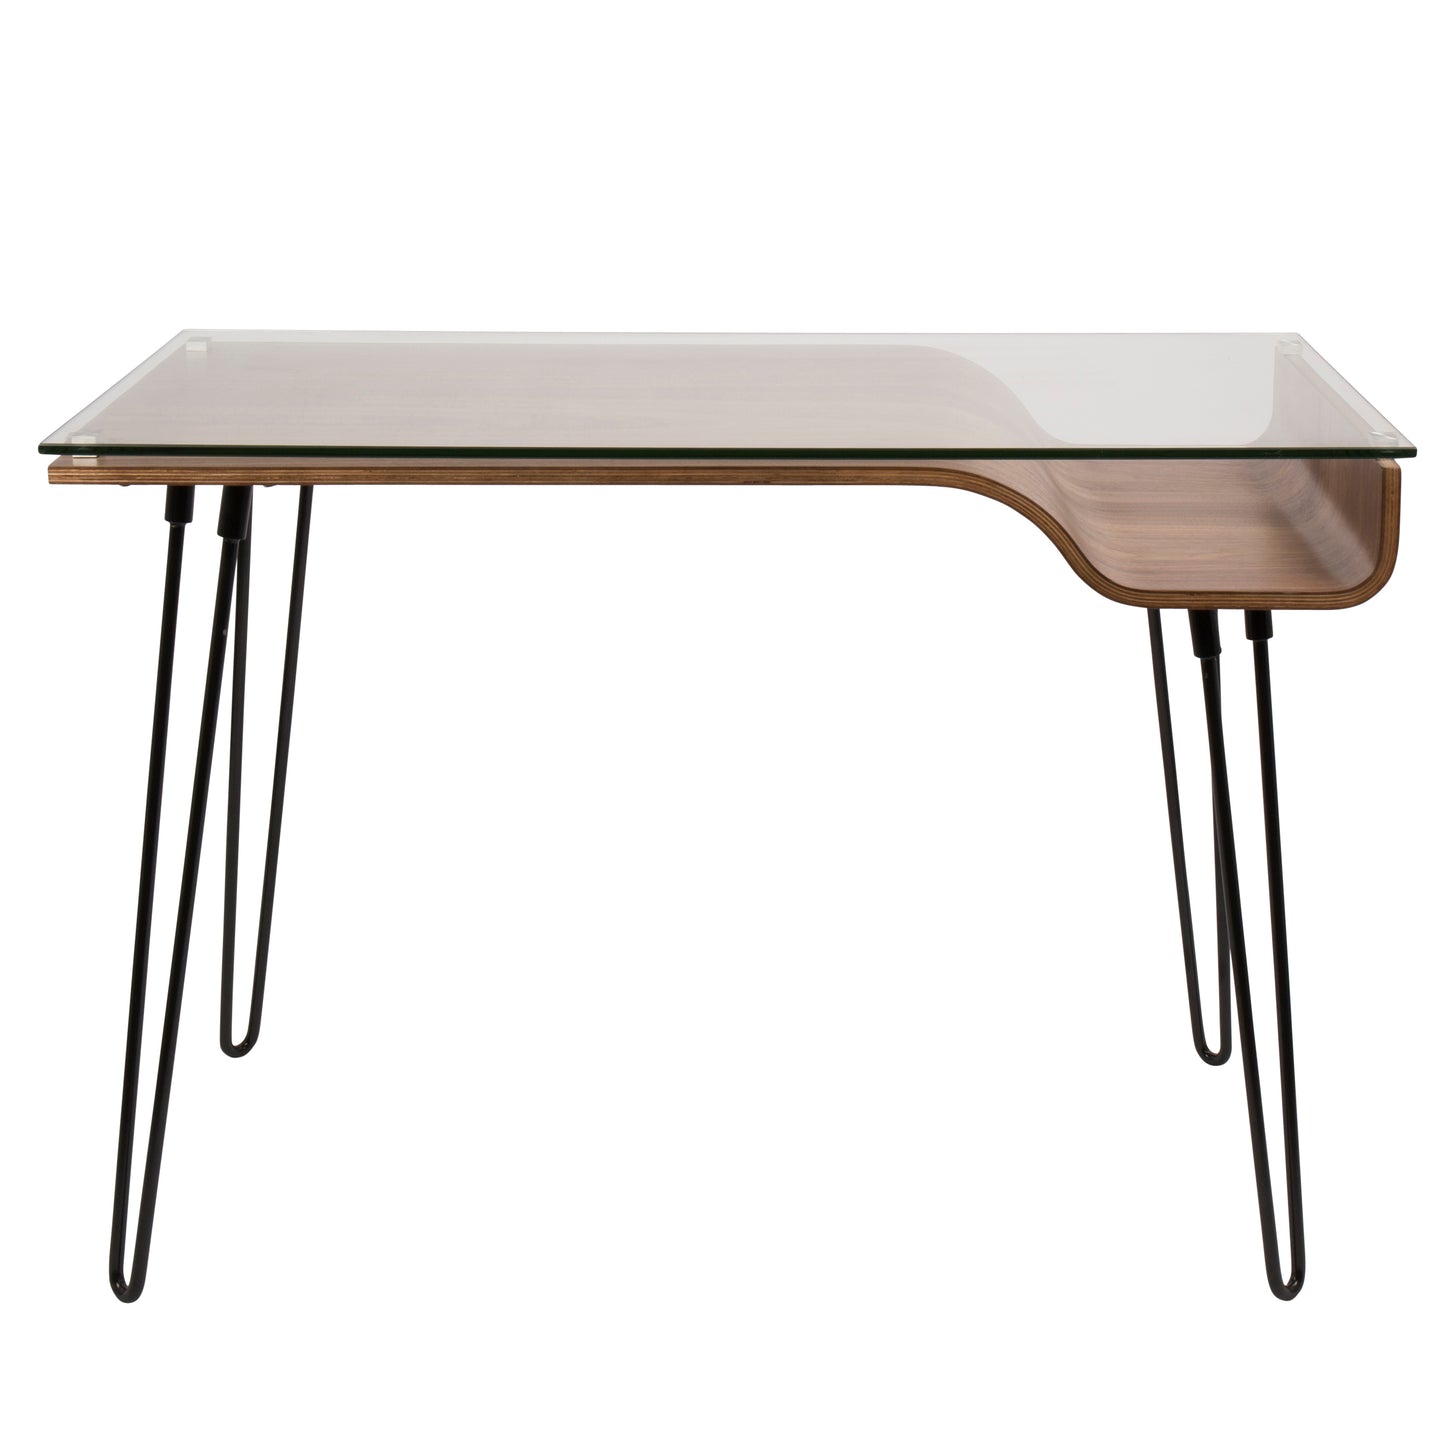 Avery Mid-Century Modern Desk in Walnut Wood, Clear Glass, and Black Metal by LumiSource